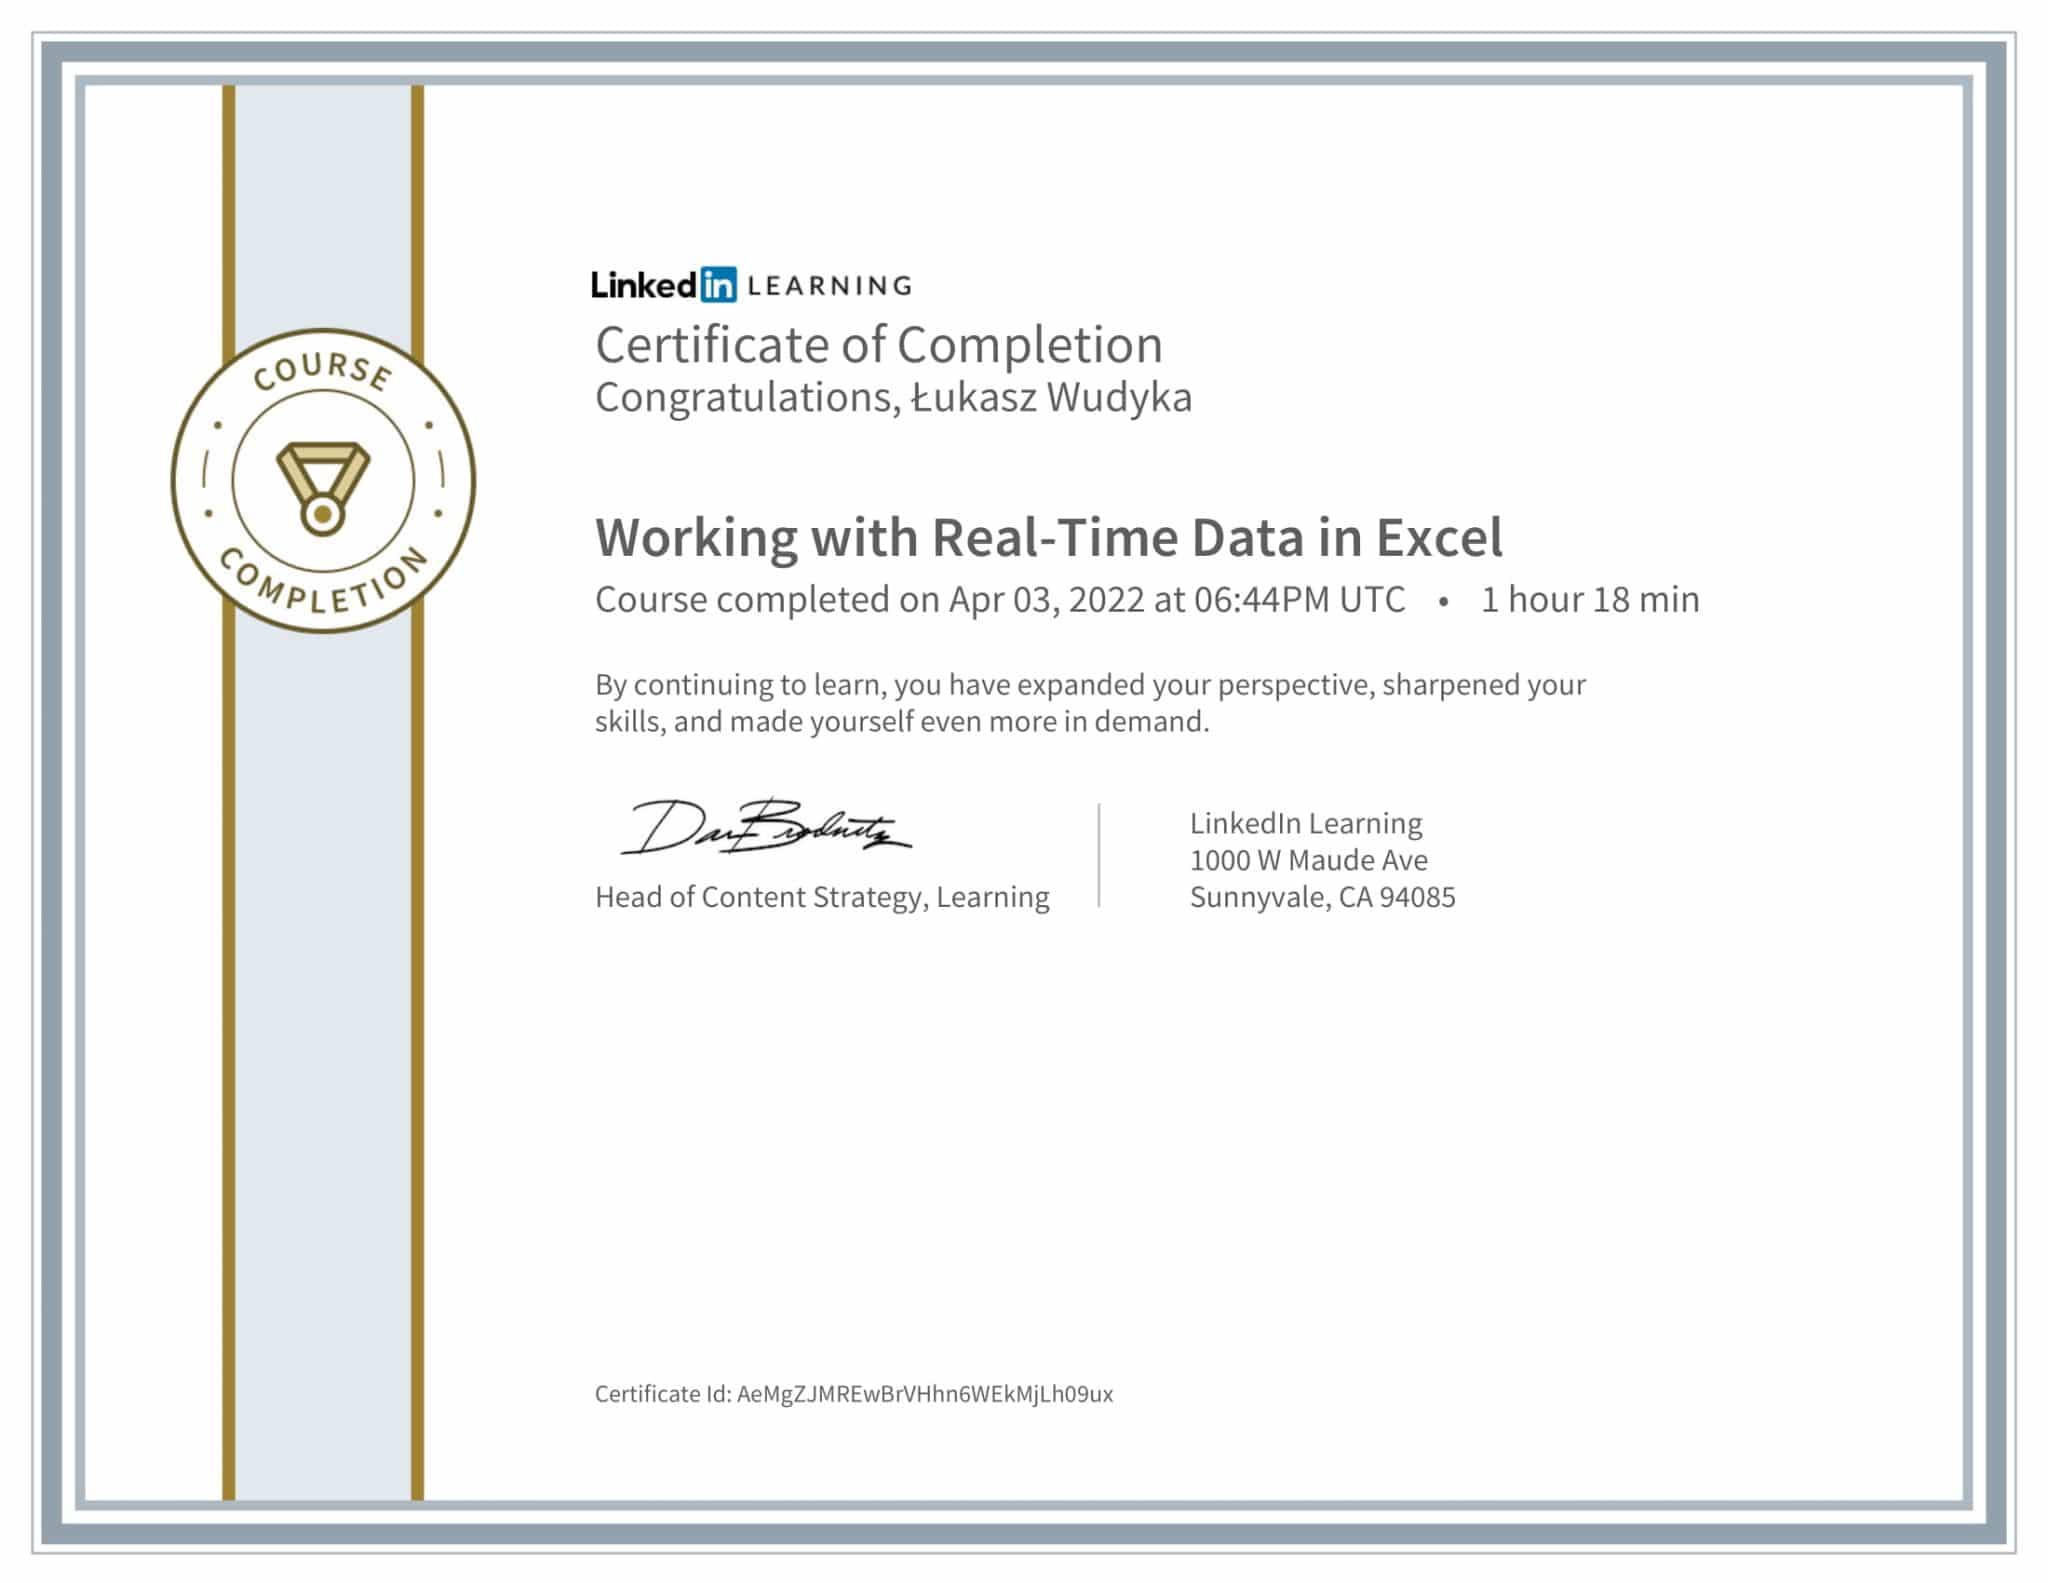 CertificateOfCompletion_Working with RealTime Data in Excel-1